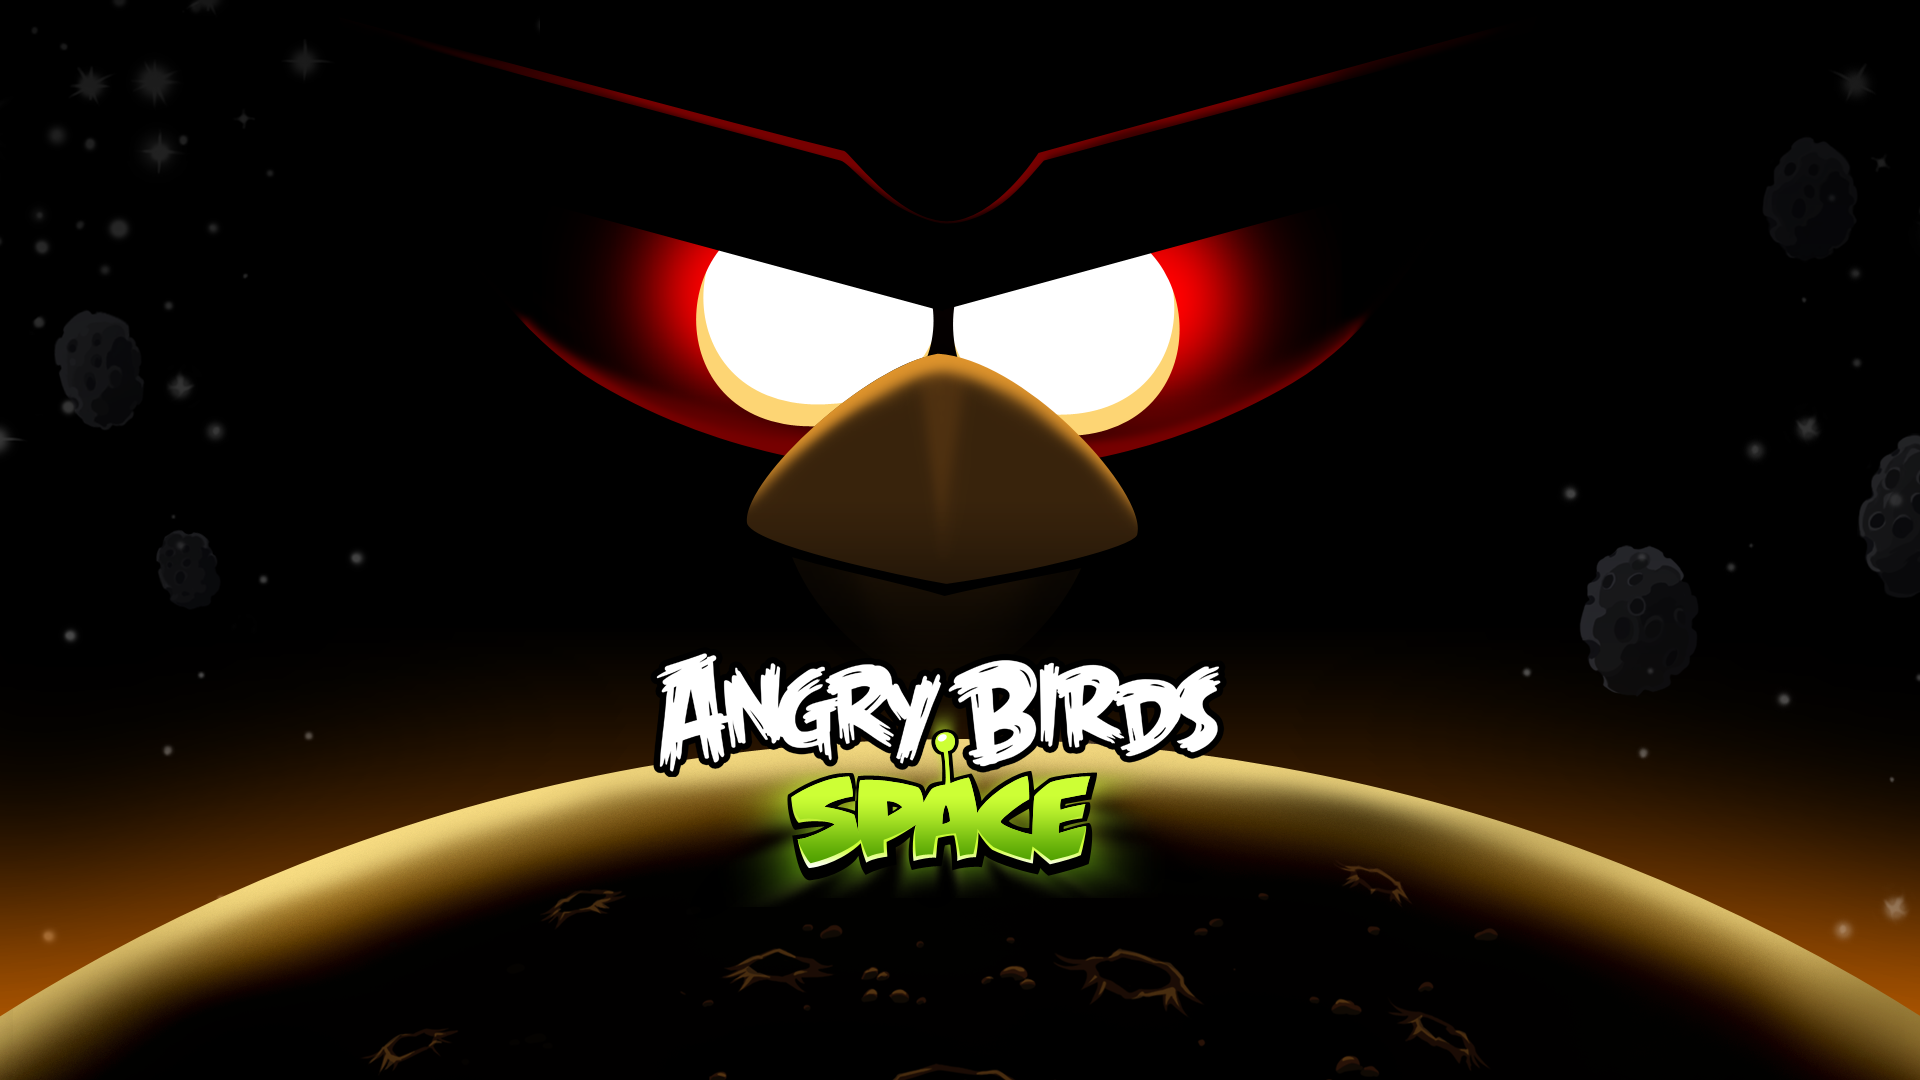 Wallpaper Hd 1080p Angry Birds Free Download F 17378 Hd Wallpapers